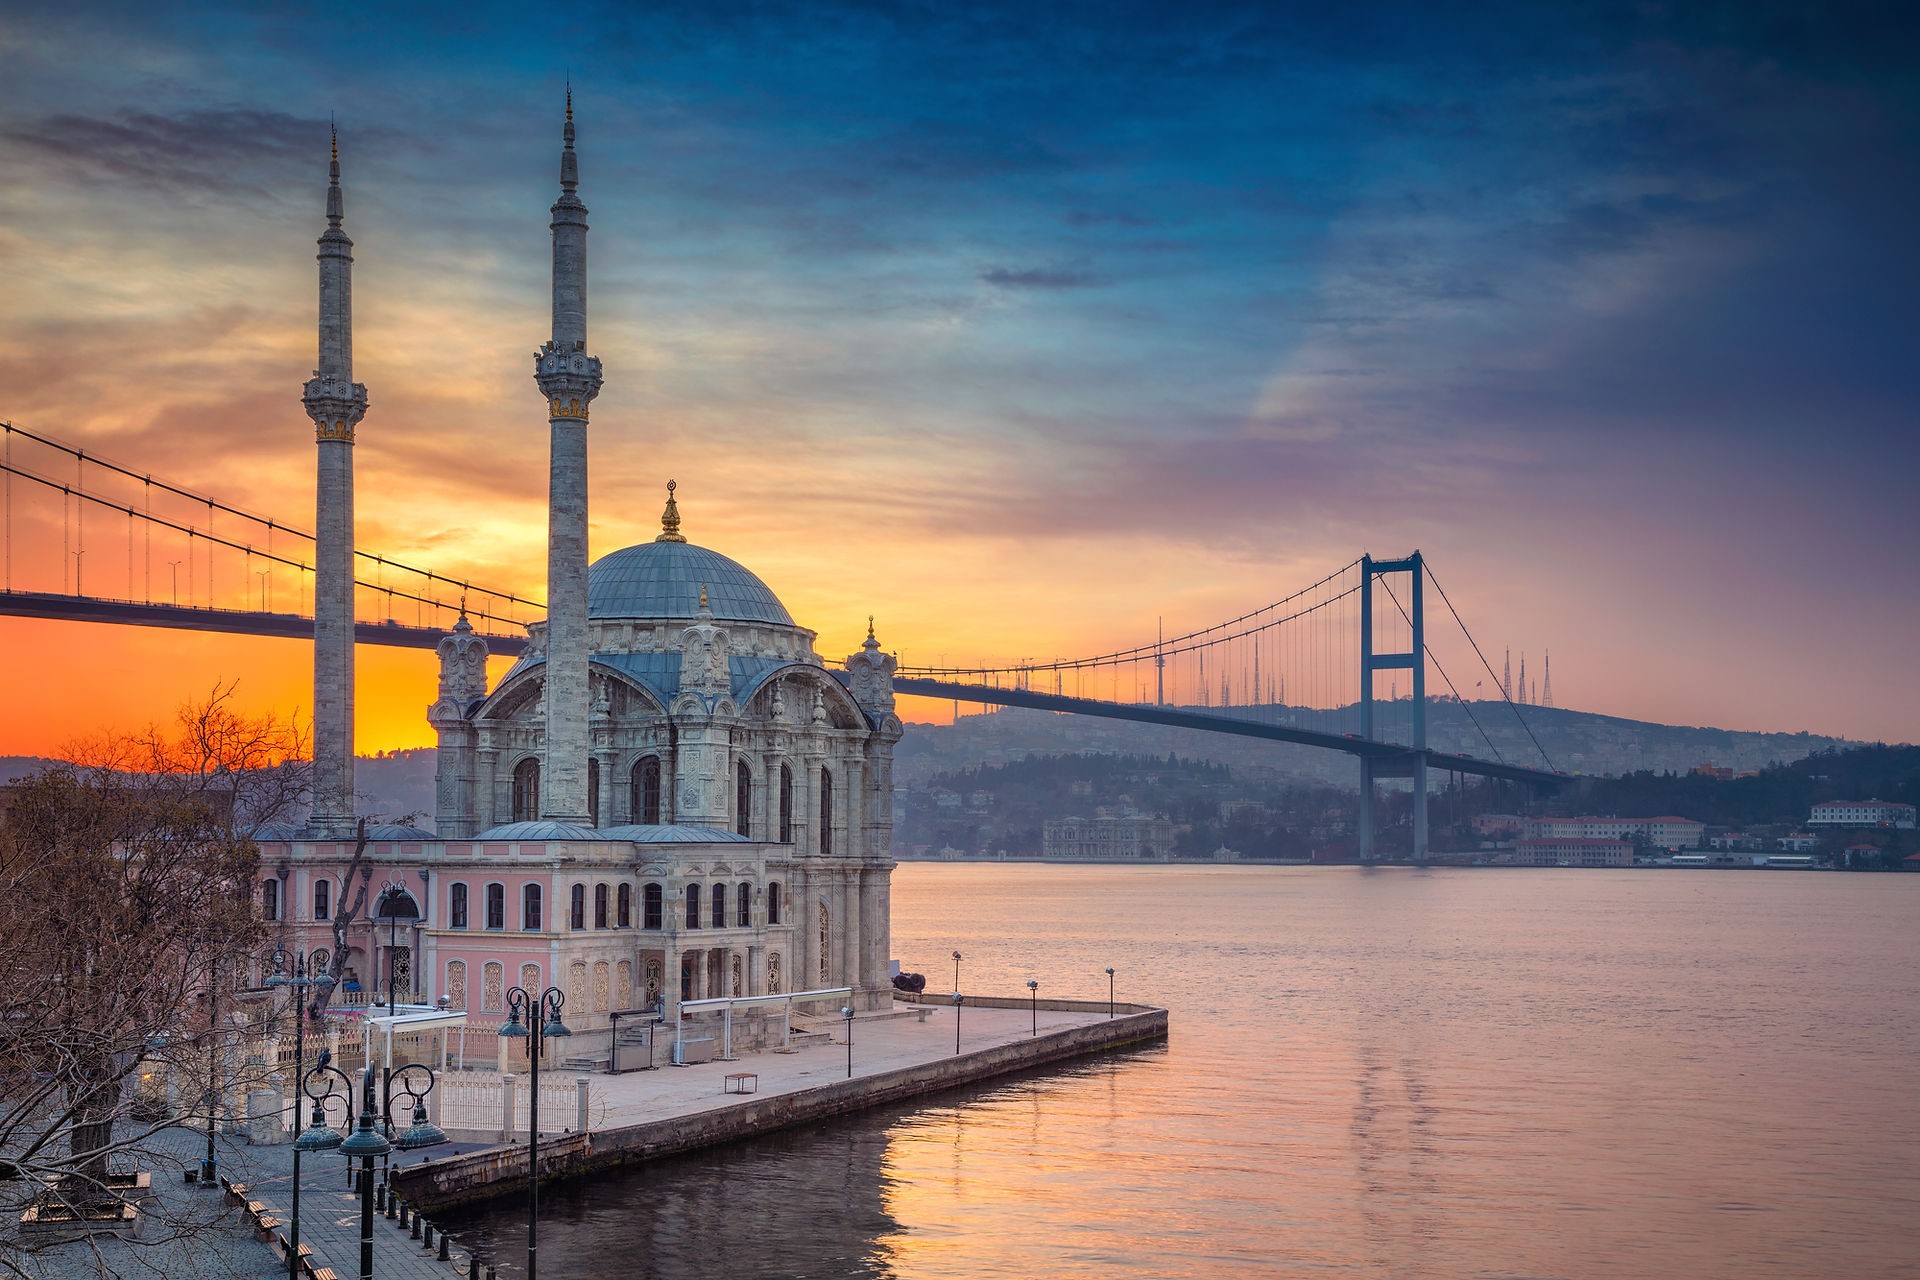 The Ortakoy Mosque in istanbul